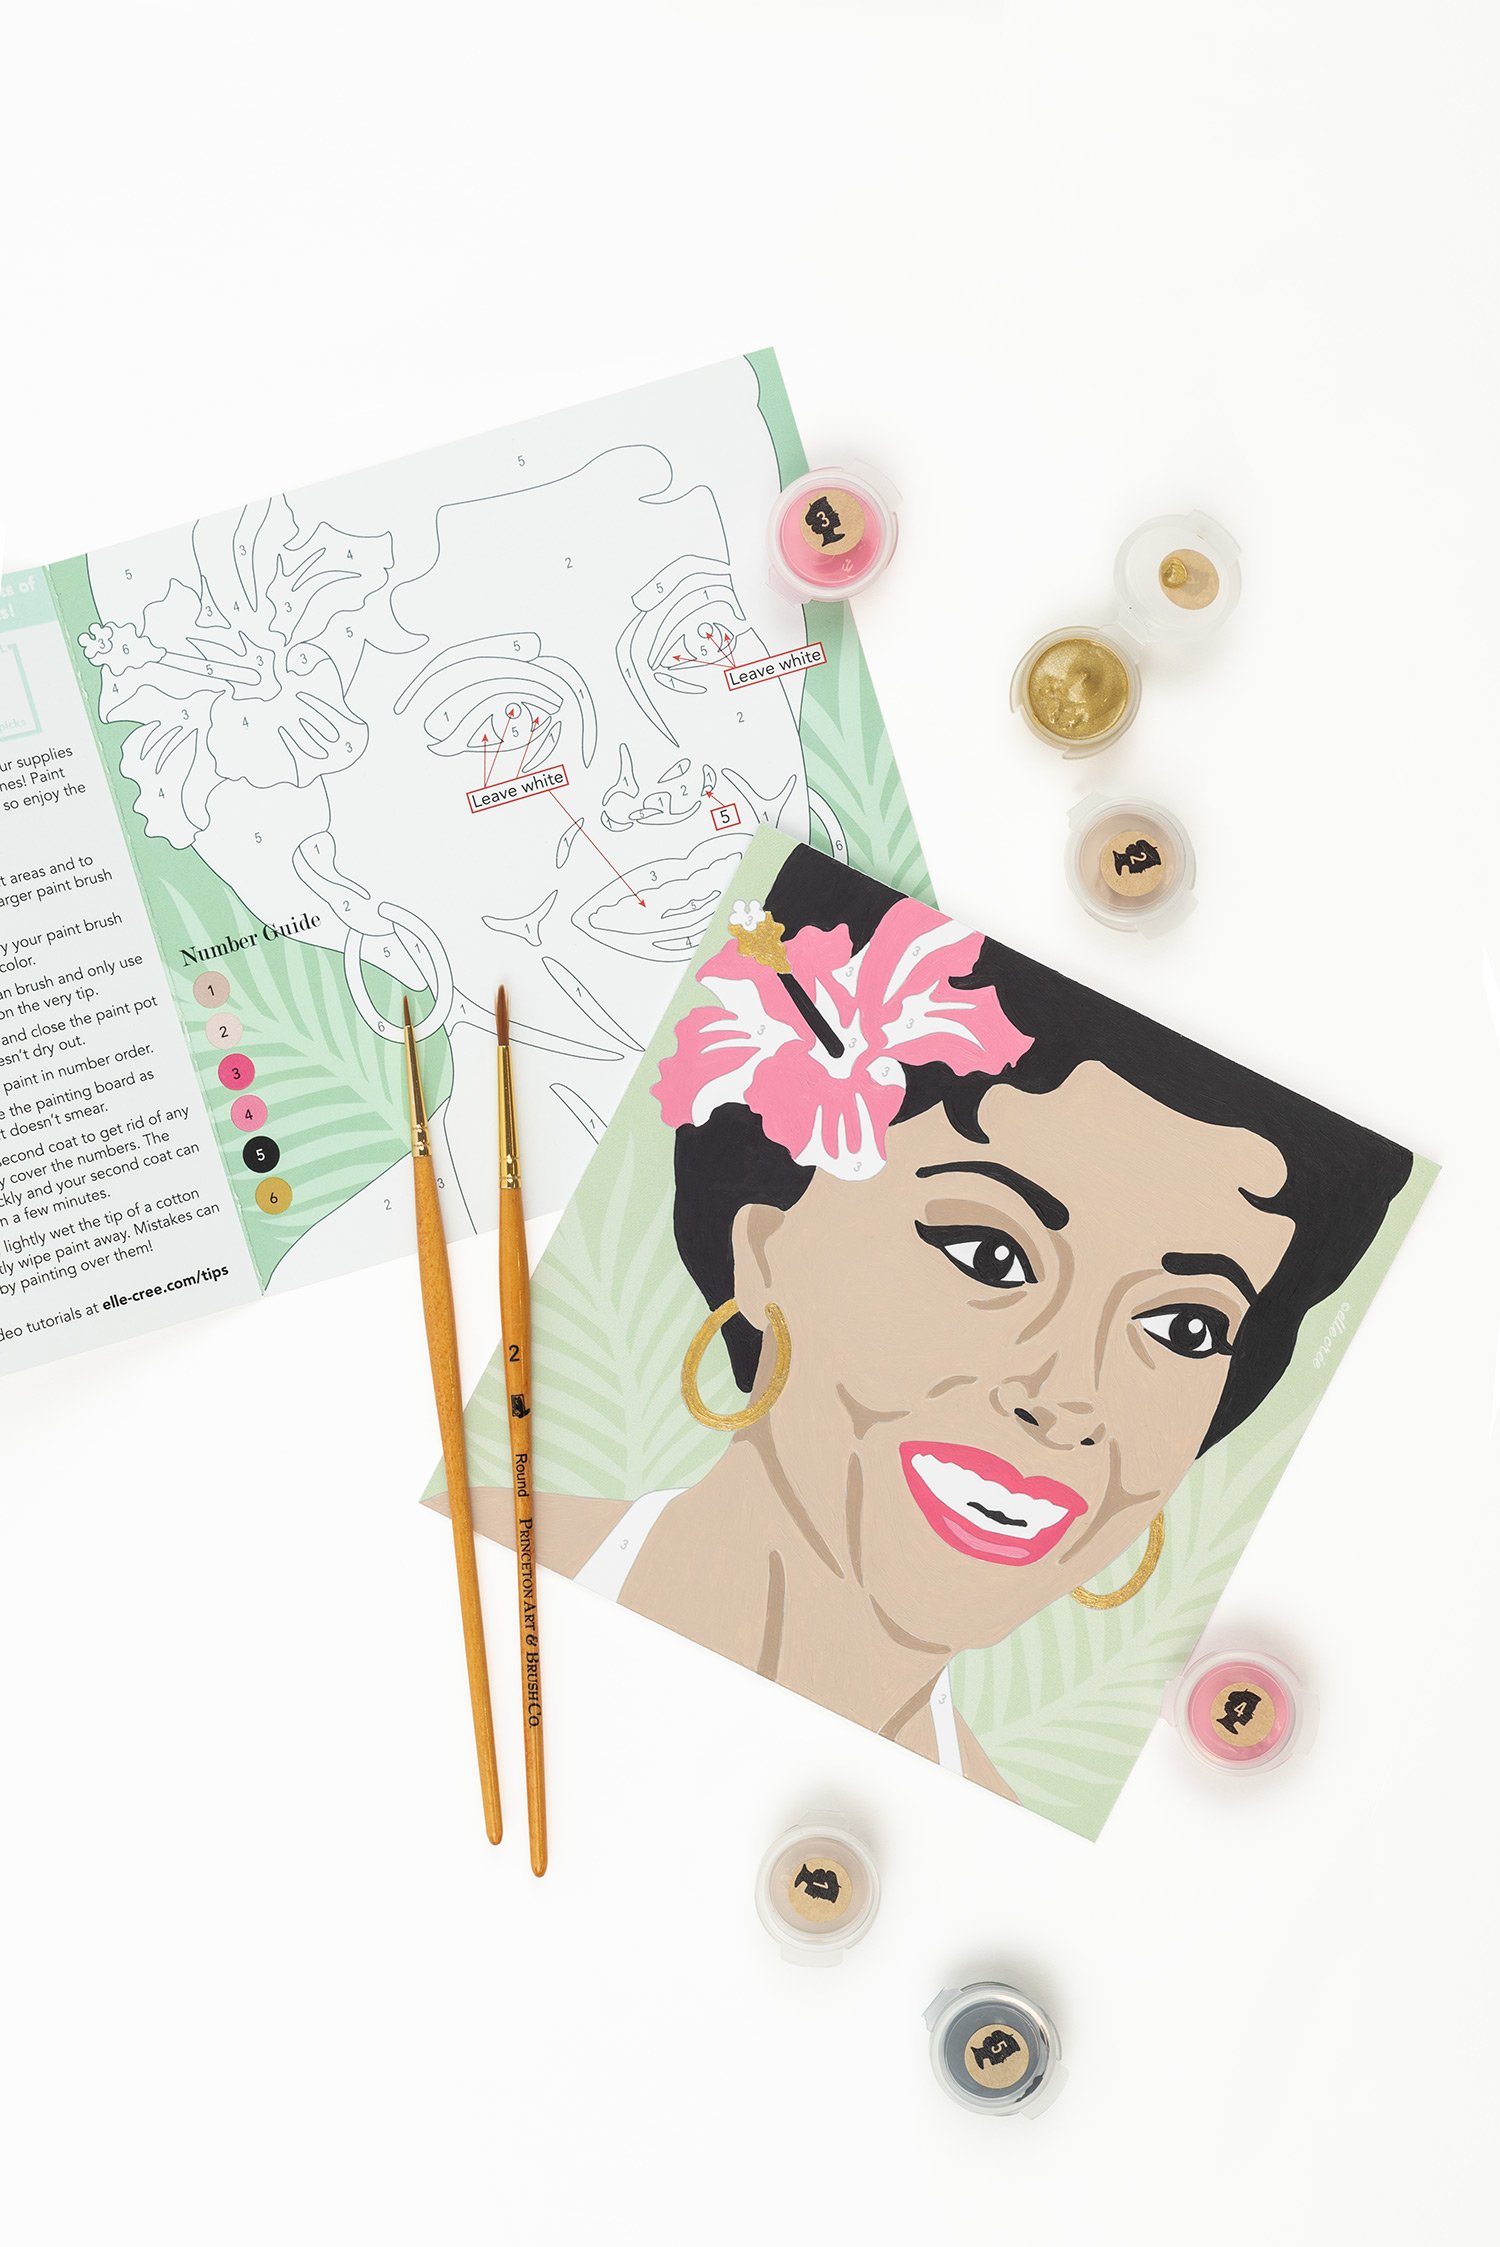 Rita Moreno | Mini Paint-by-Number Kit for Adults — Elle Crée (she creates)